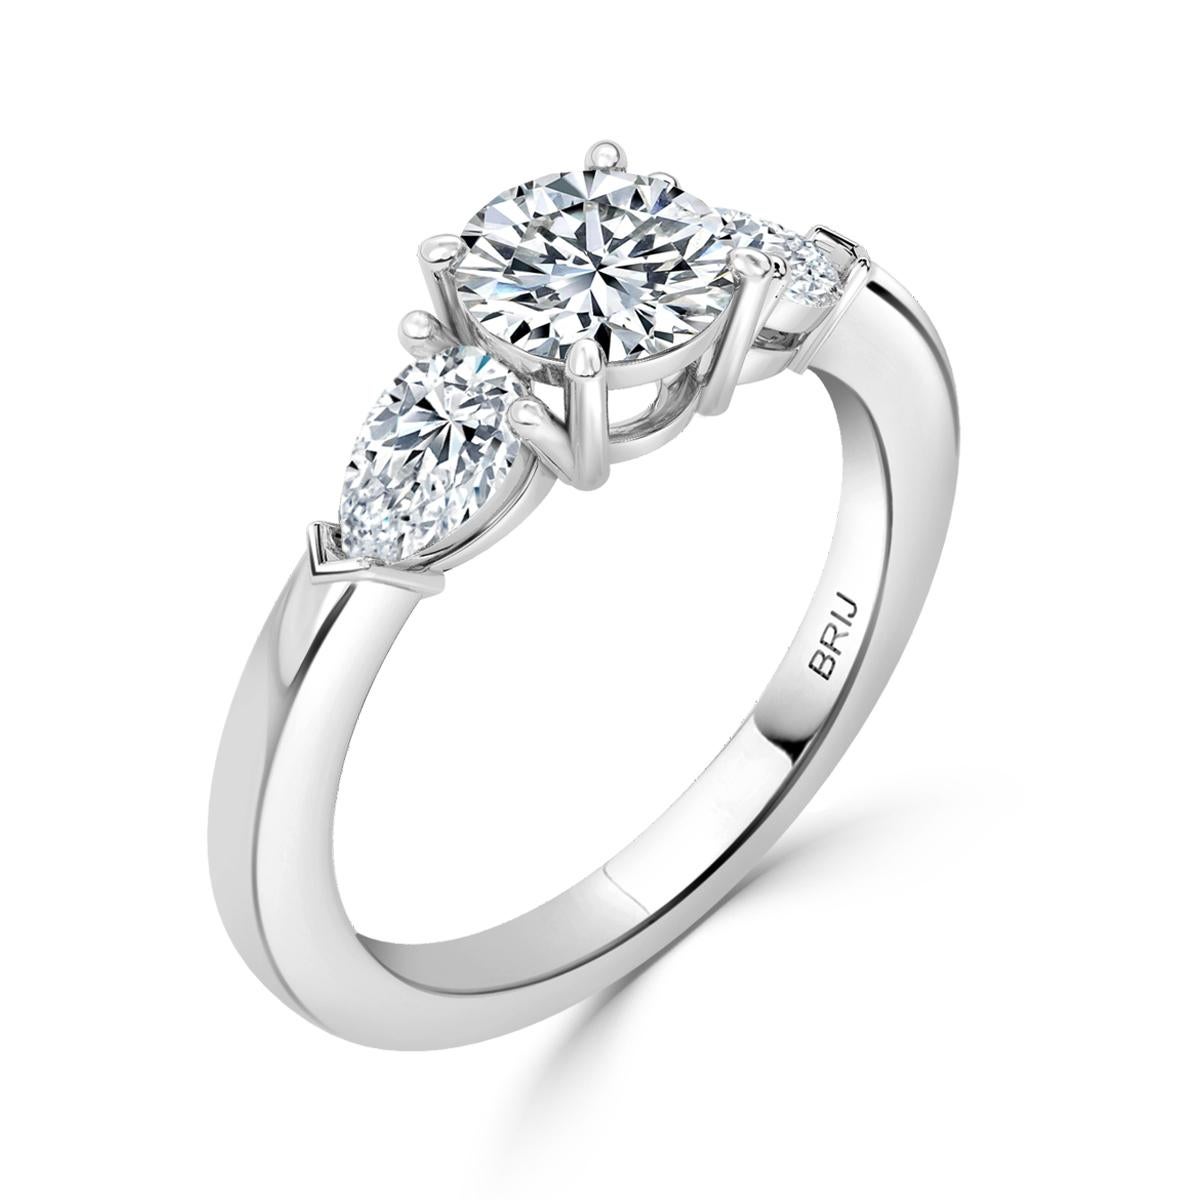 Simple, Classic 3 Stone Diamond engagement ring. Accented with 2 Pear cut GIA Diamonds along the shank  in a 18k White Gold setting. 
GIA certified round center stone 0.80 CT
GIA Certified Side Pear Carat weight 0.64 CT

GIA Certified Diamond